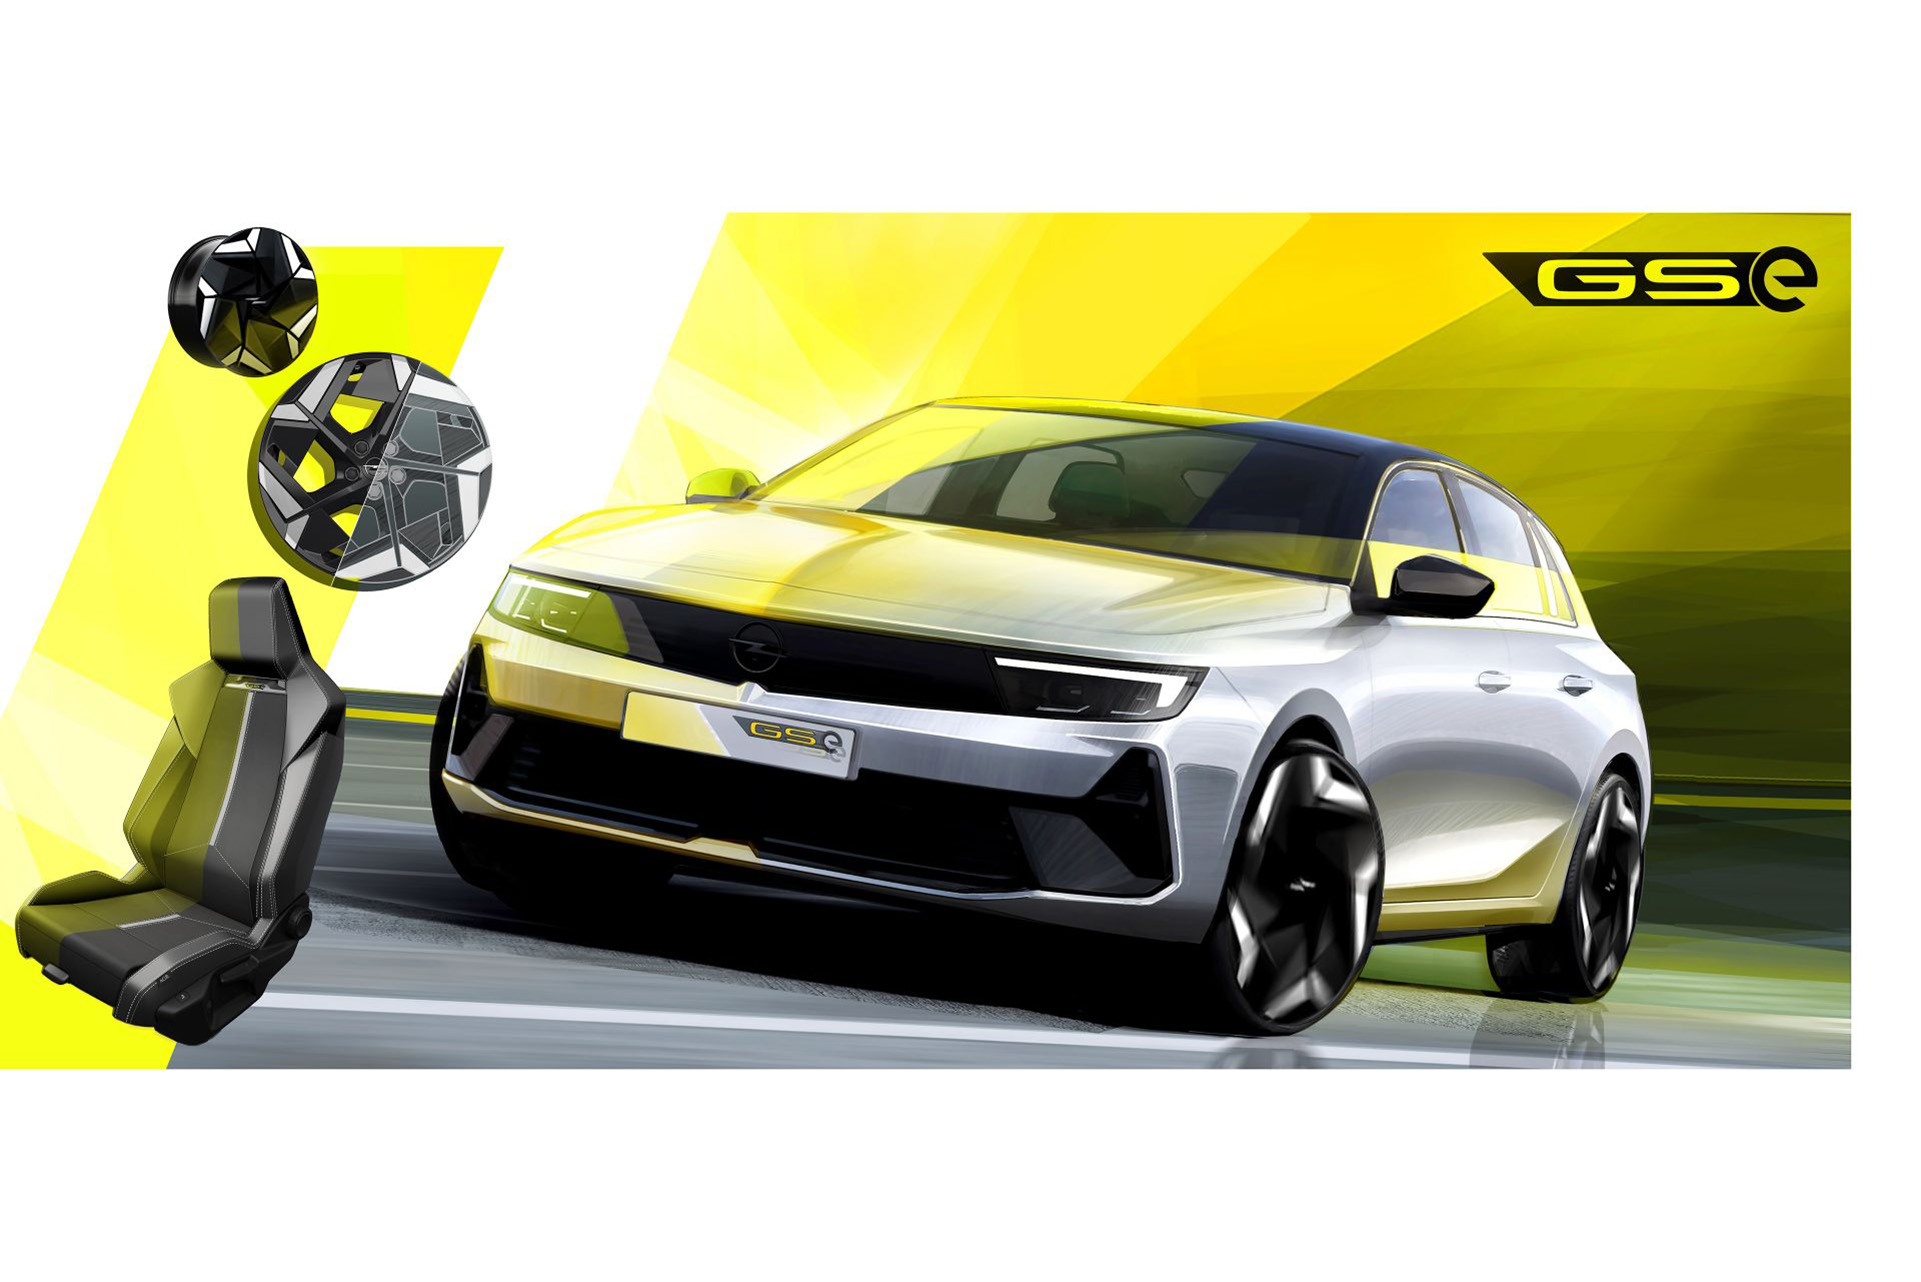 2023 Opel Astra GSe Design Sketch Wallpapers  #15 of 16